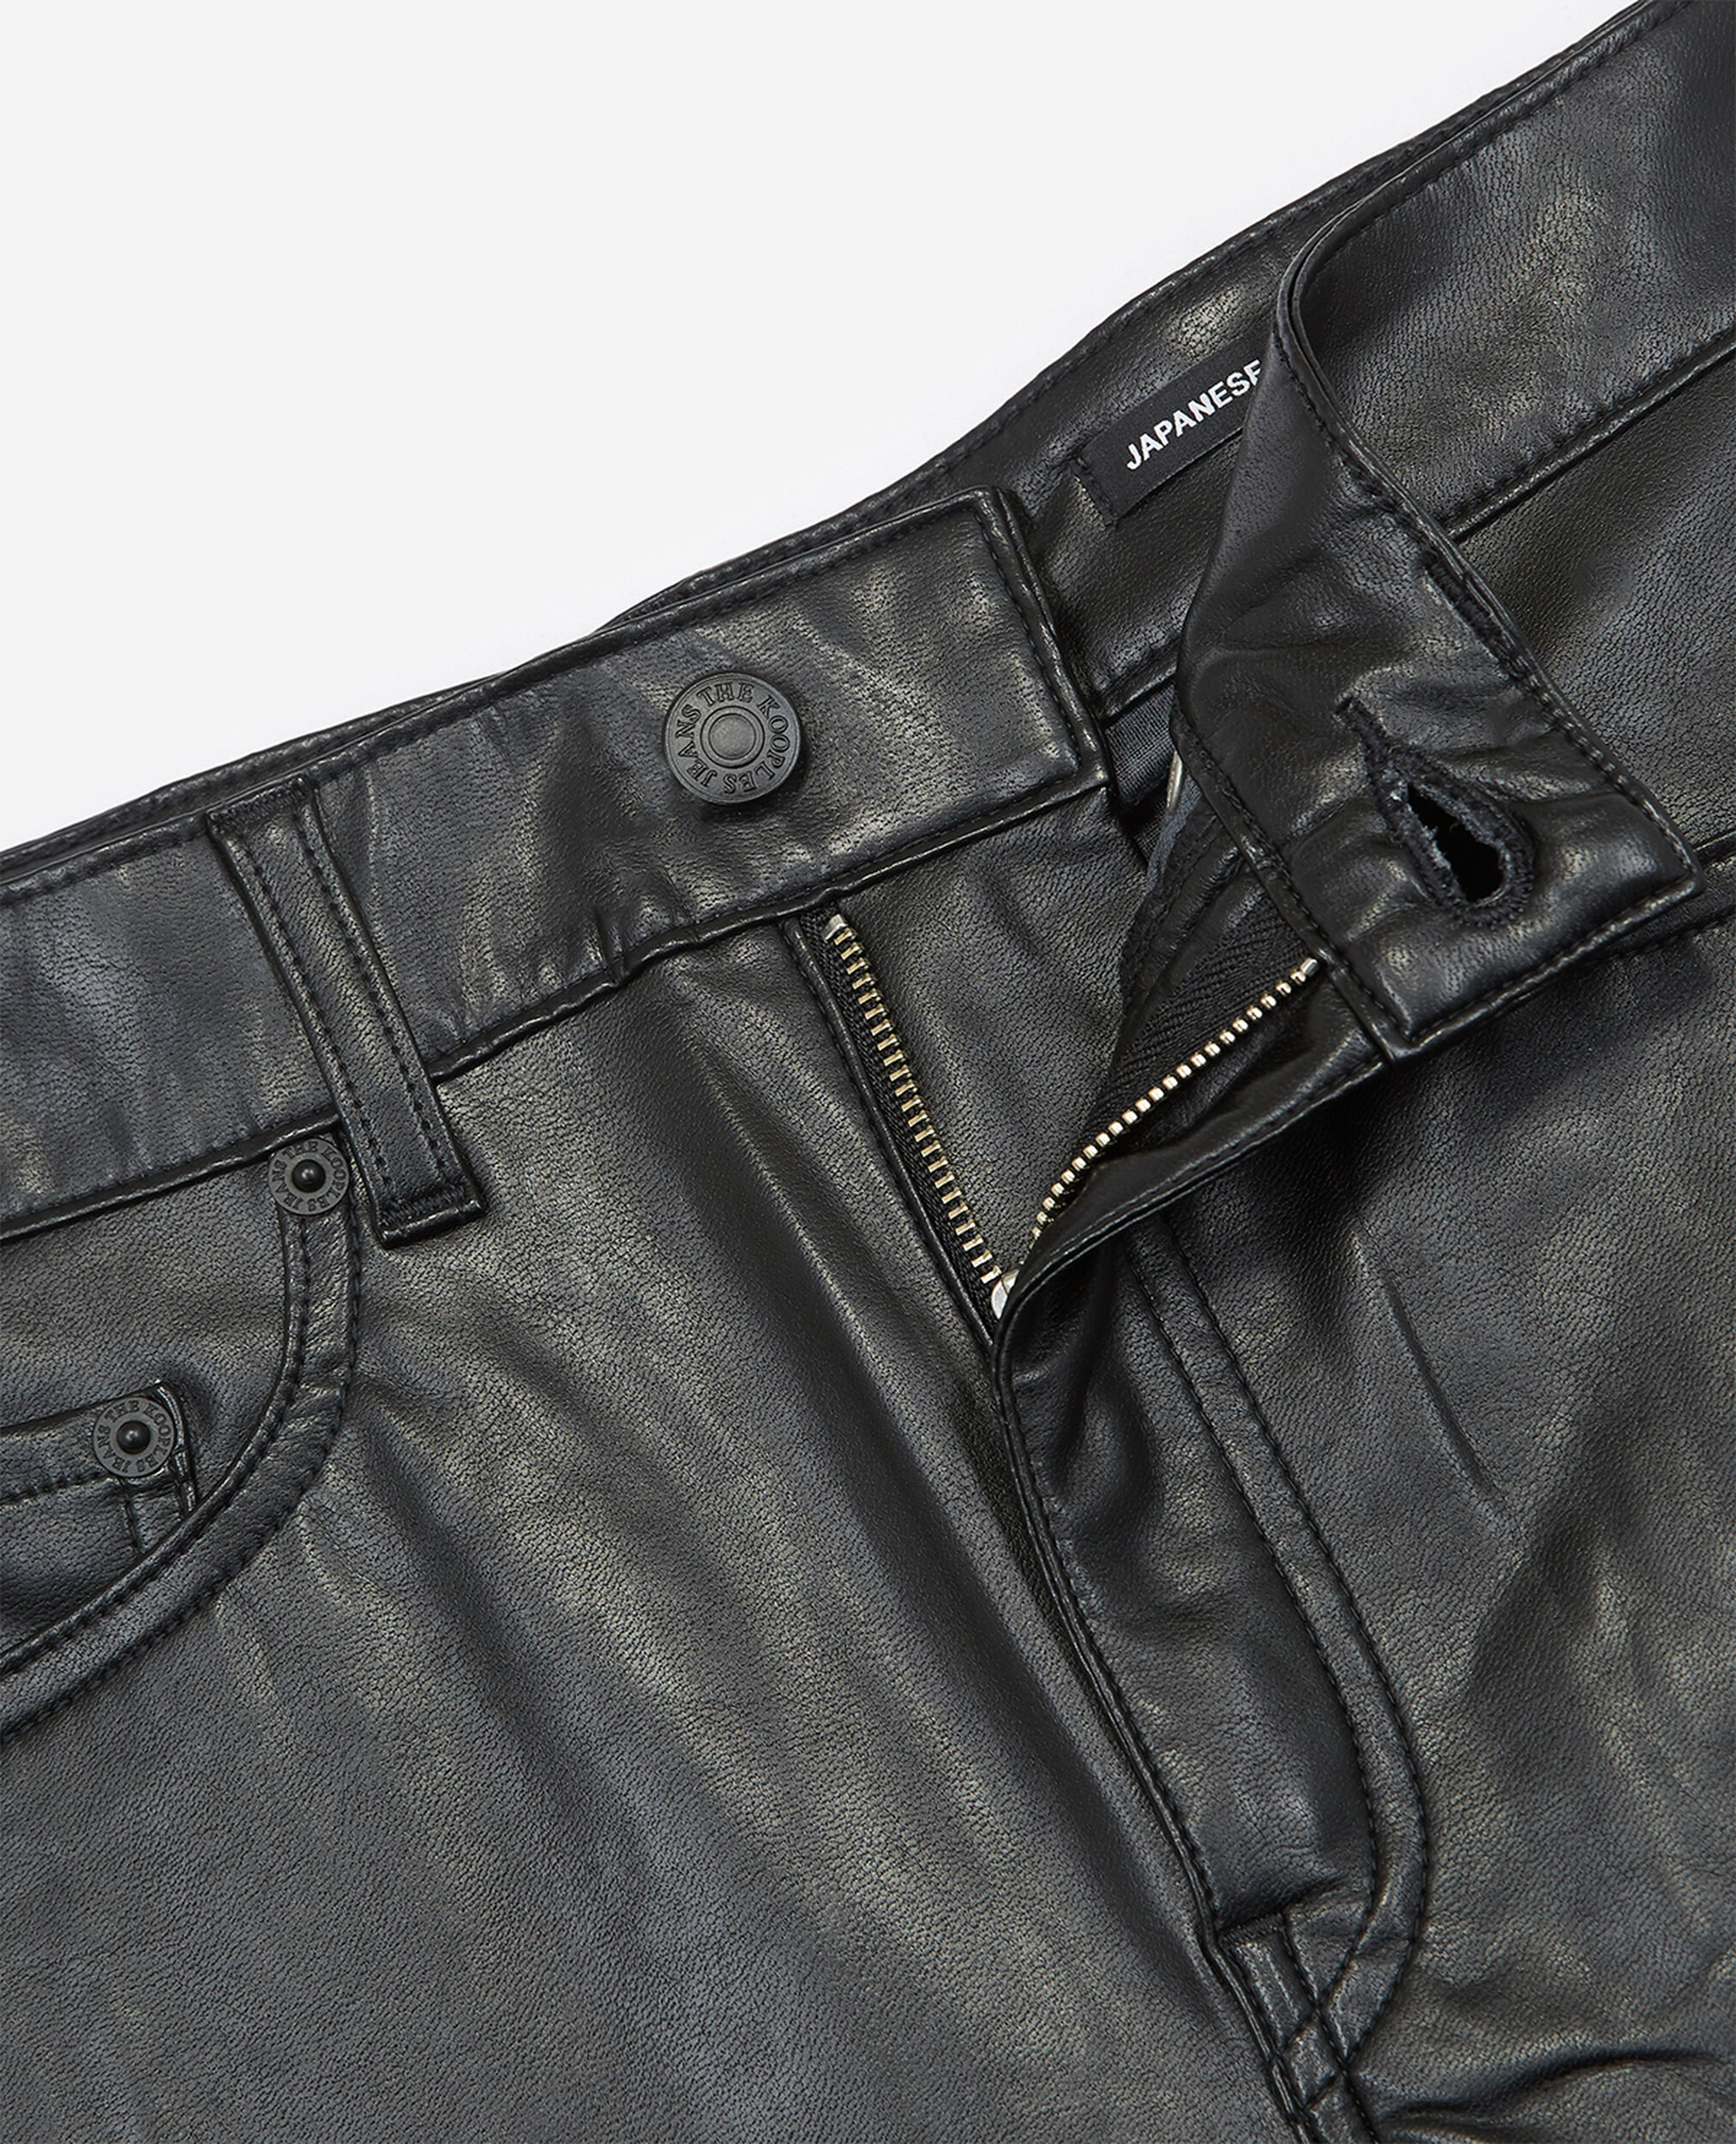 Fitted jean-style black trousers, BLACK, hi-res image number null